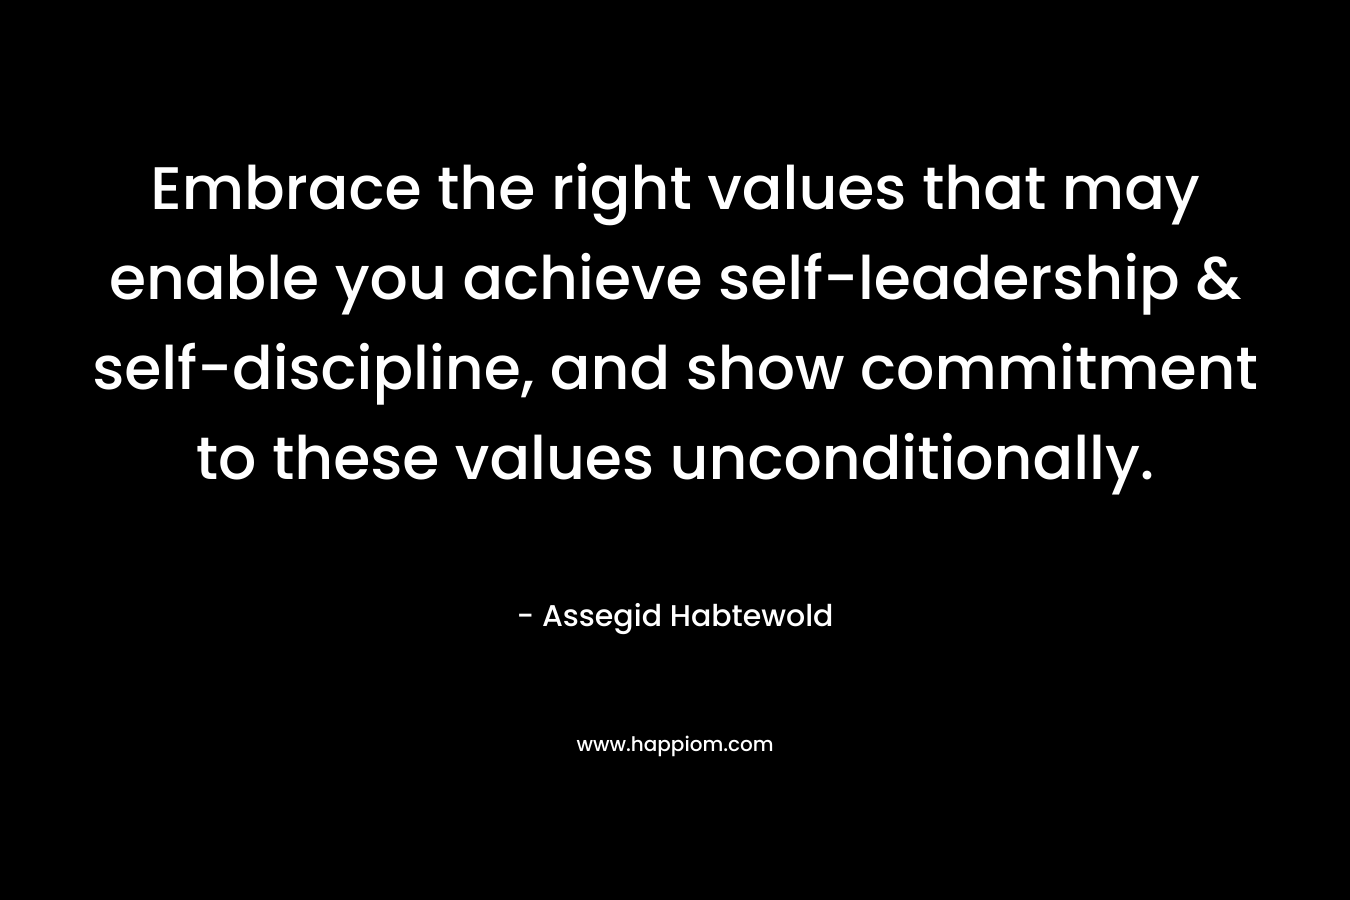 Embrace the right values that may enable you achieve self-leadership & self-discipline, and show commitment to these values unconditionally.